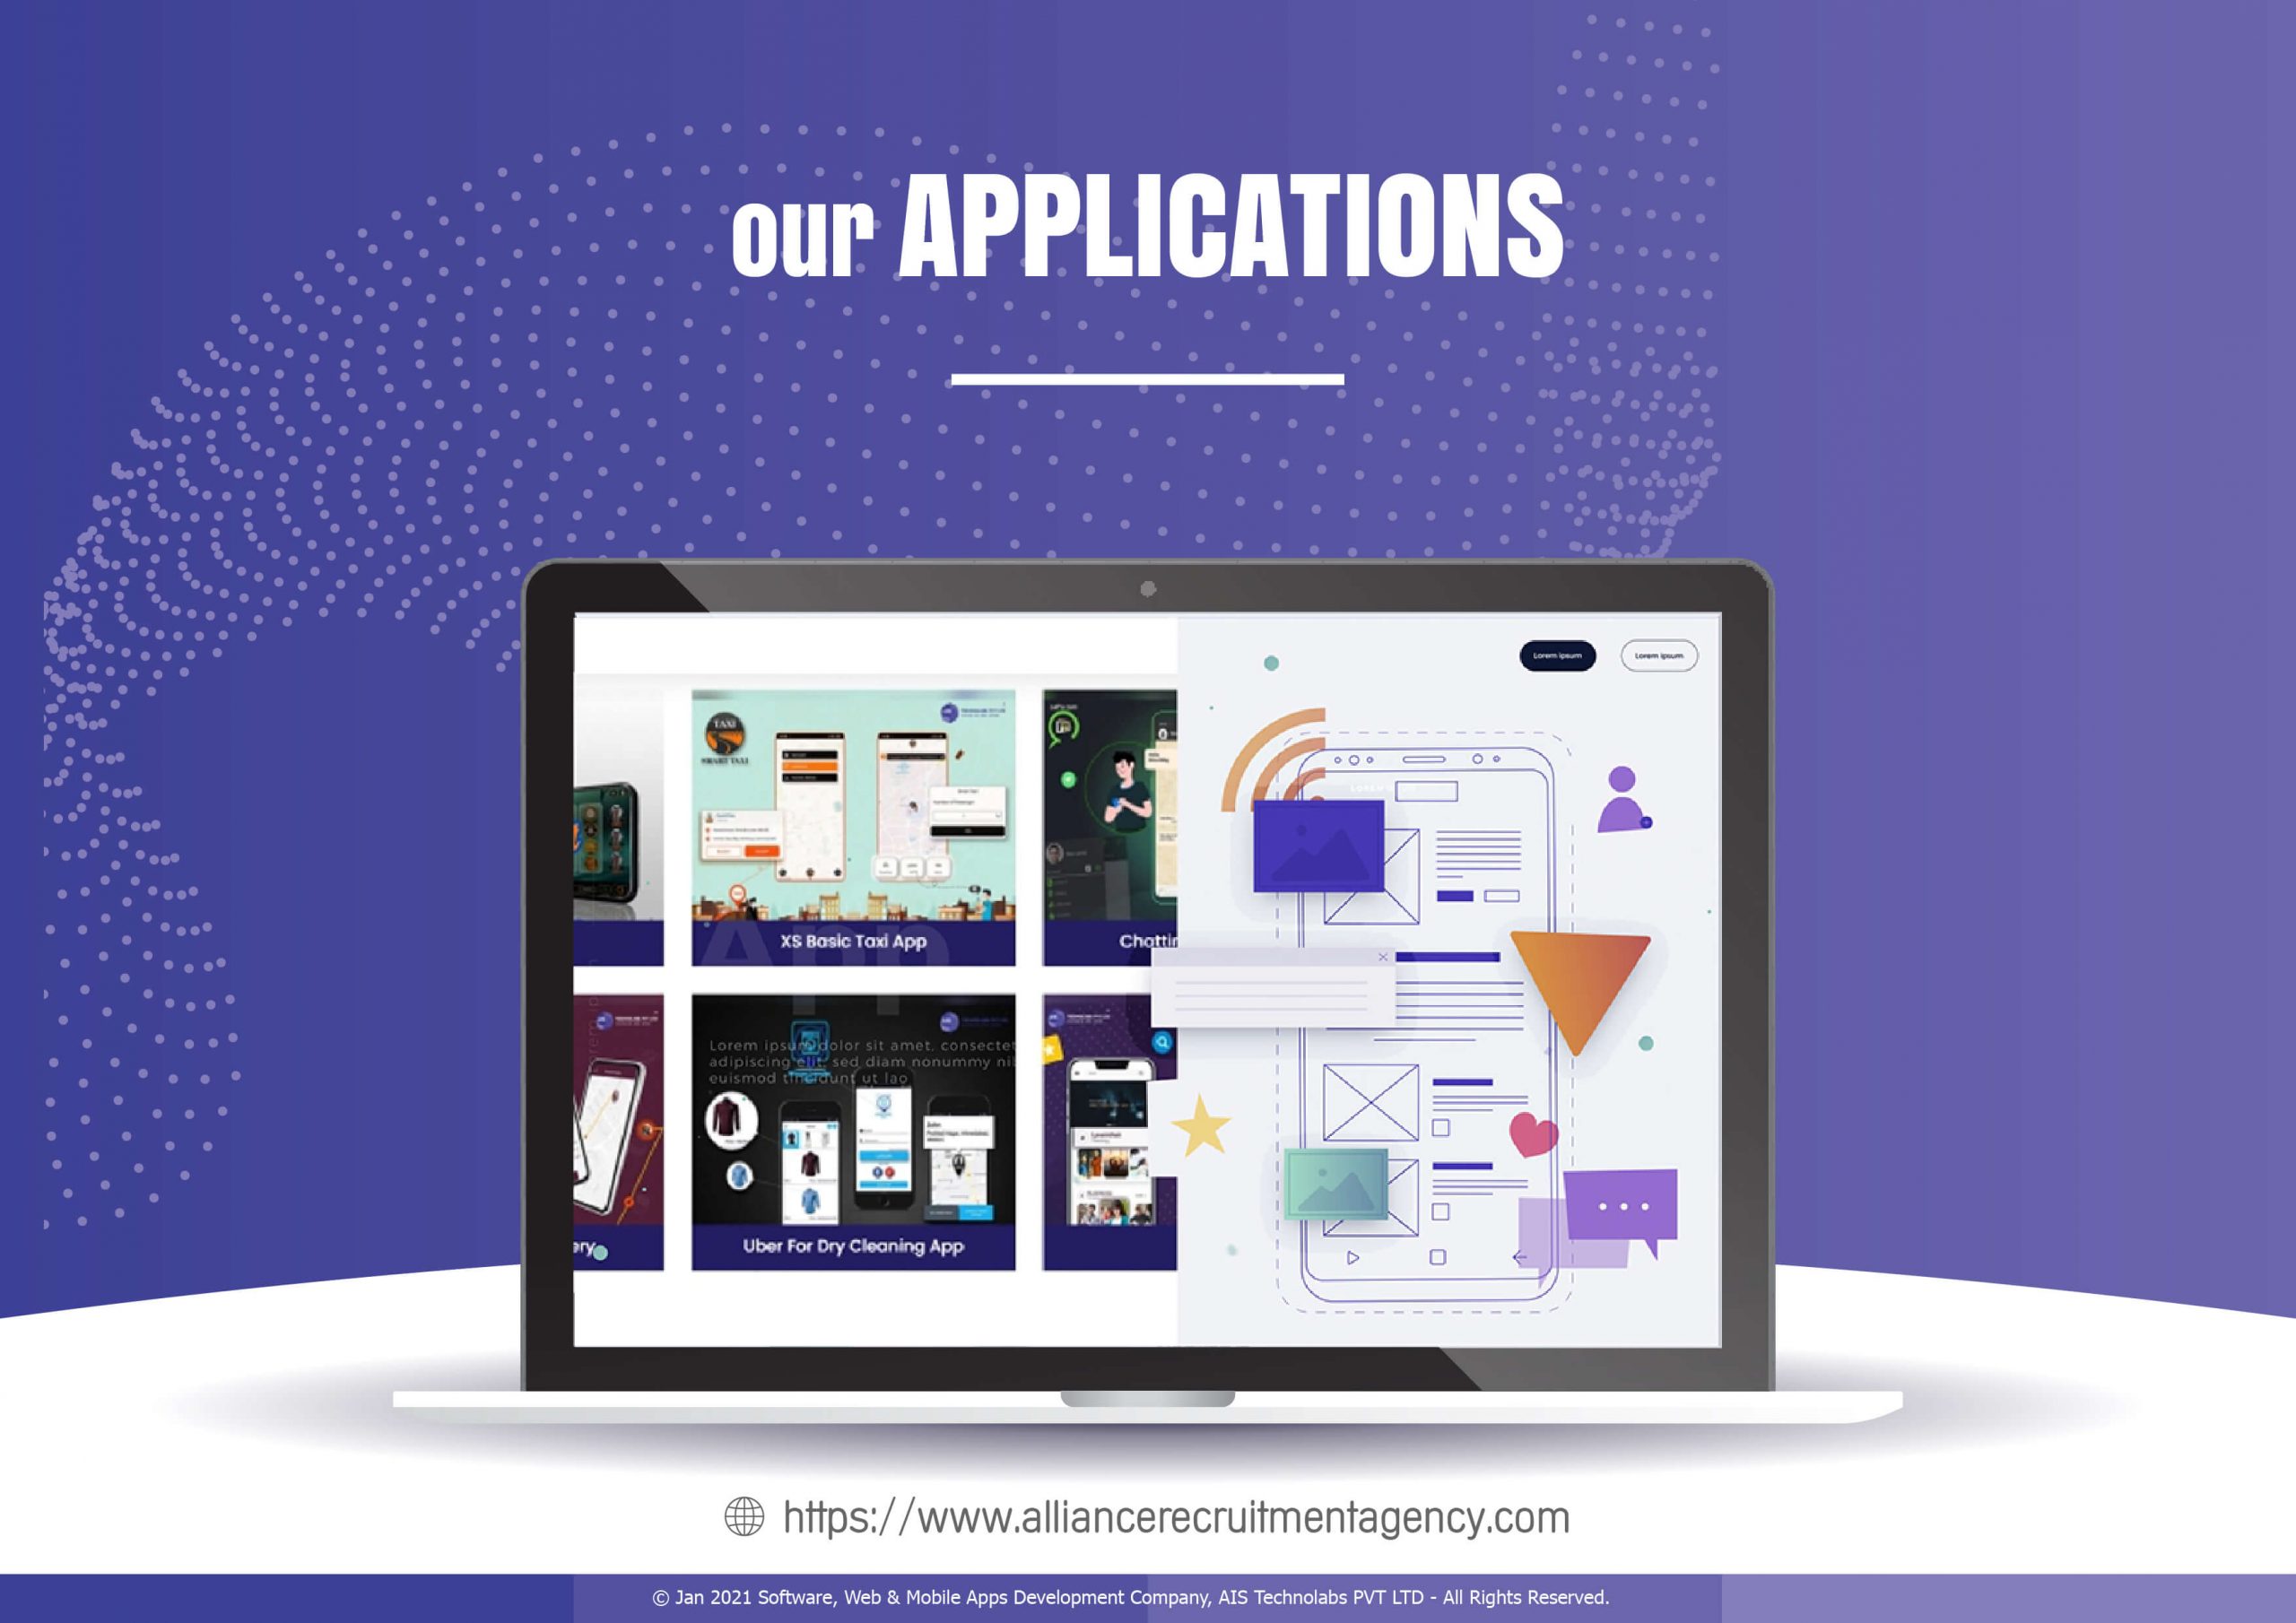 Our Applications